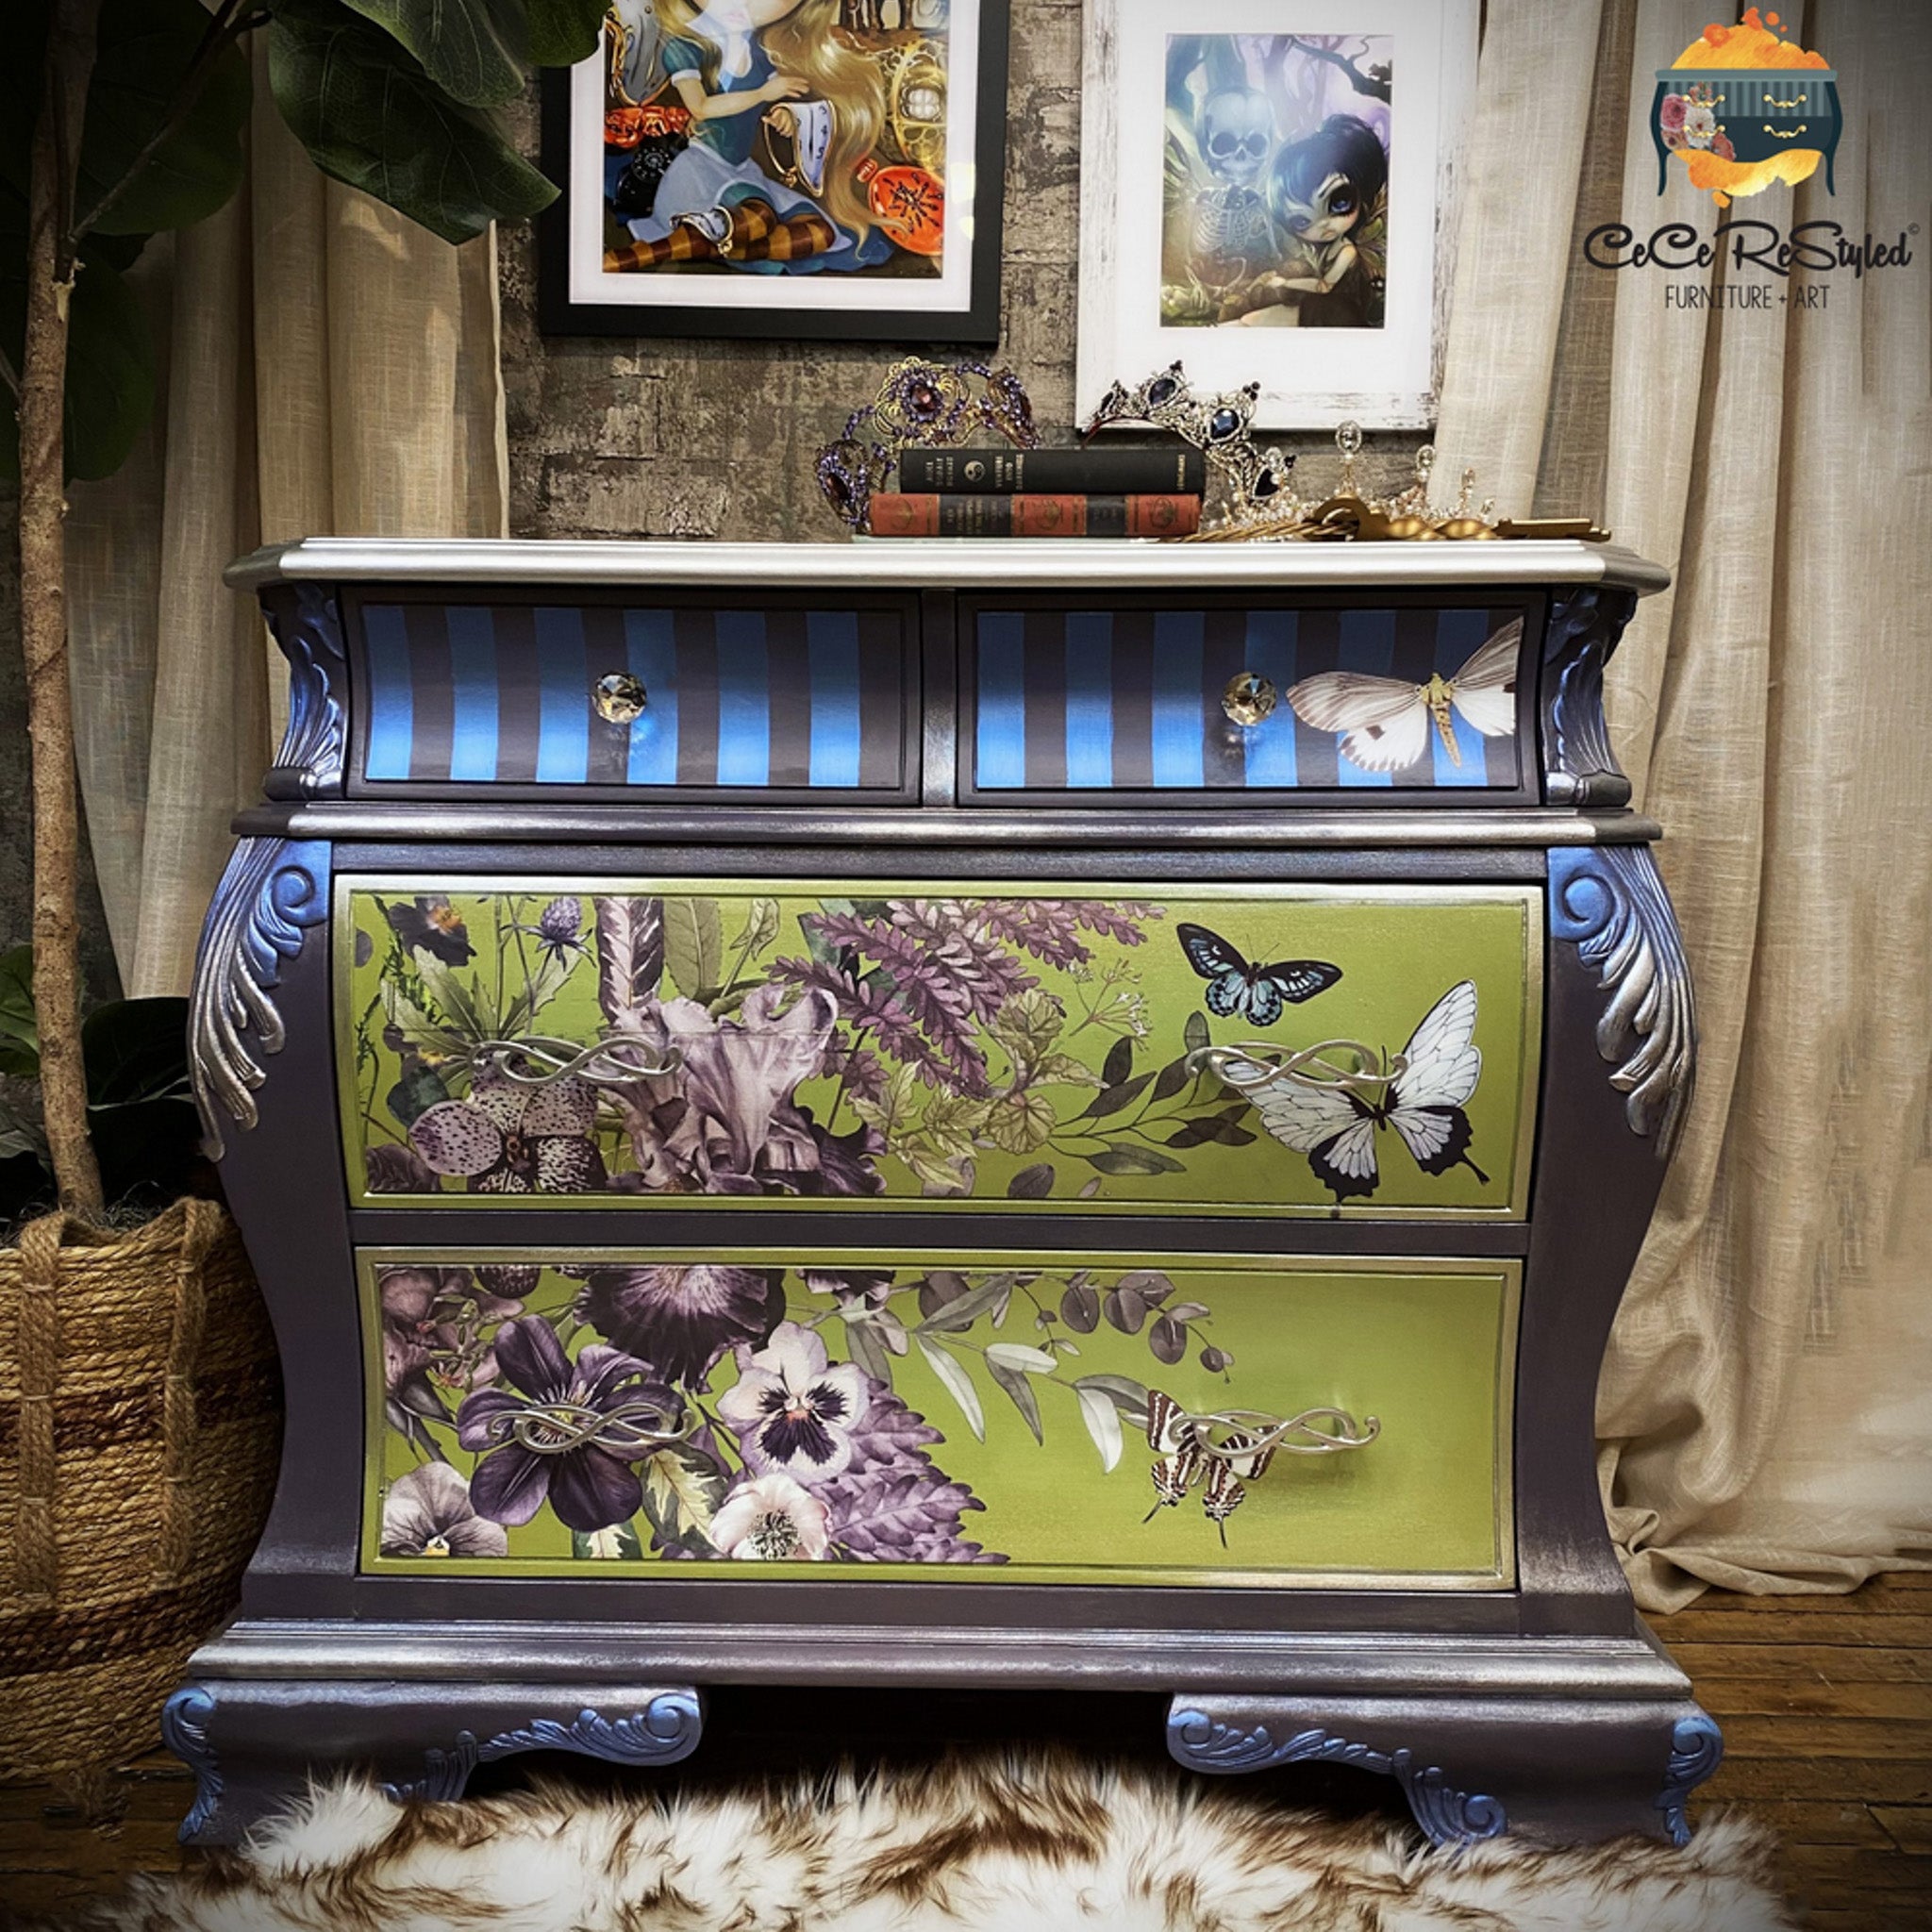 A vintage Bombay style dresser refurbished by CeCe ReStyled is painted dark grey with blue highlights and Spring green drawers and features ReDesign with Prima's Vigorous Violet on the drawers.